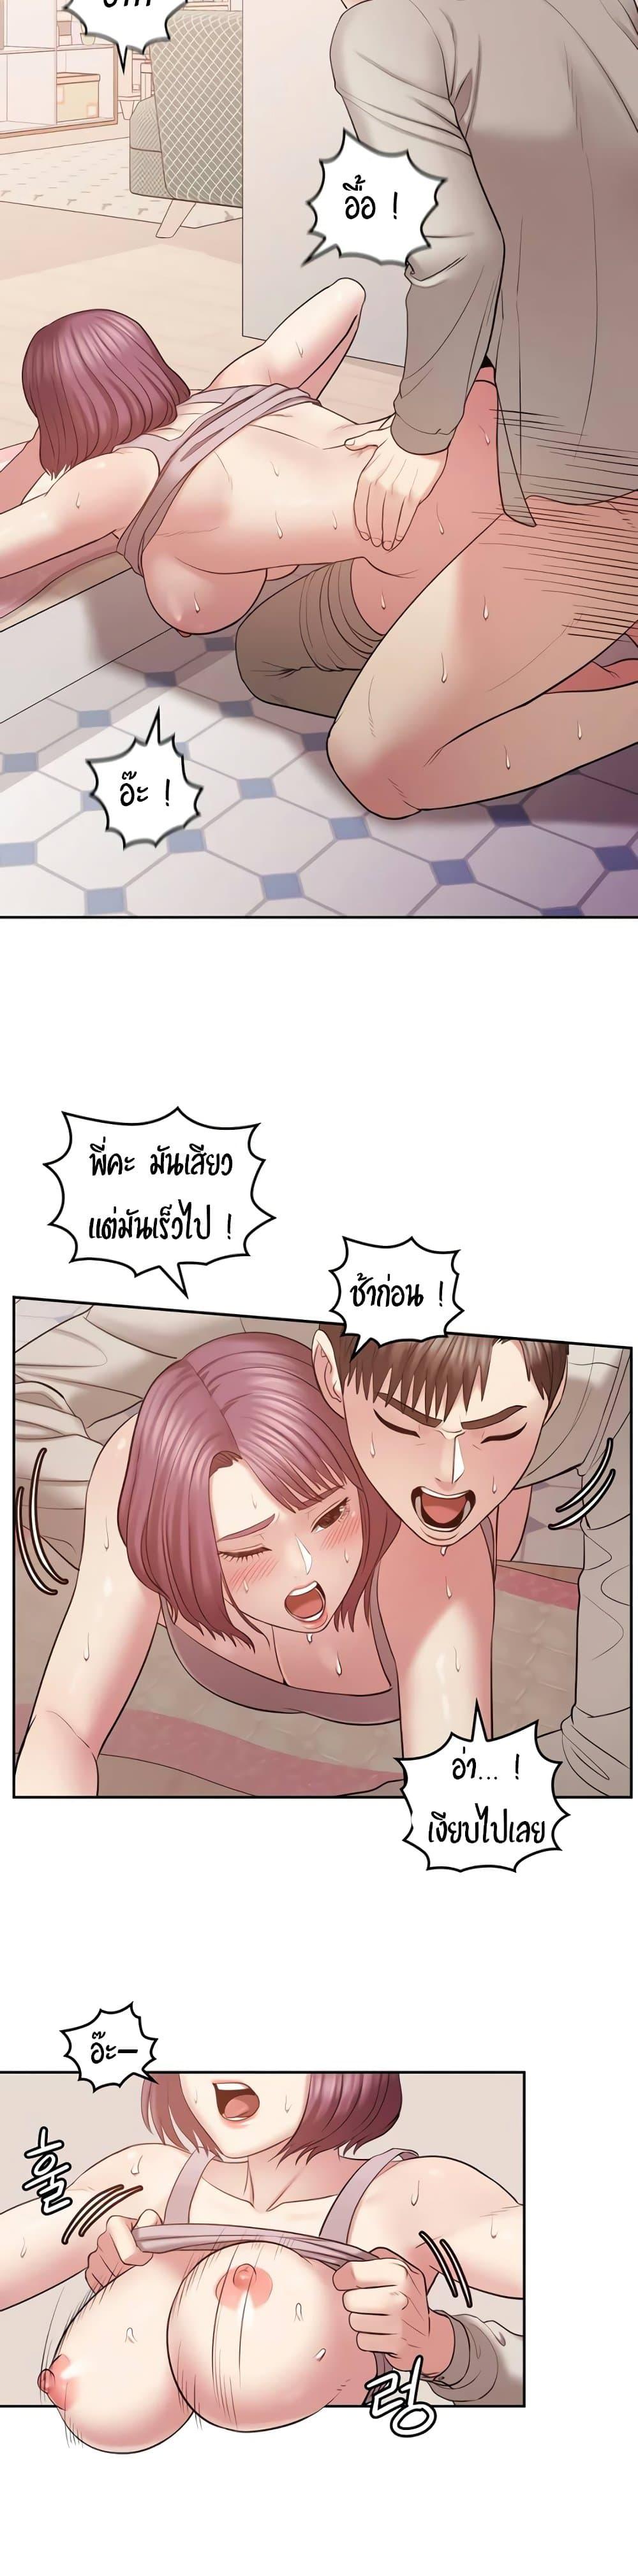 Sexual Consulting 2 ภาพ 33